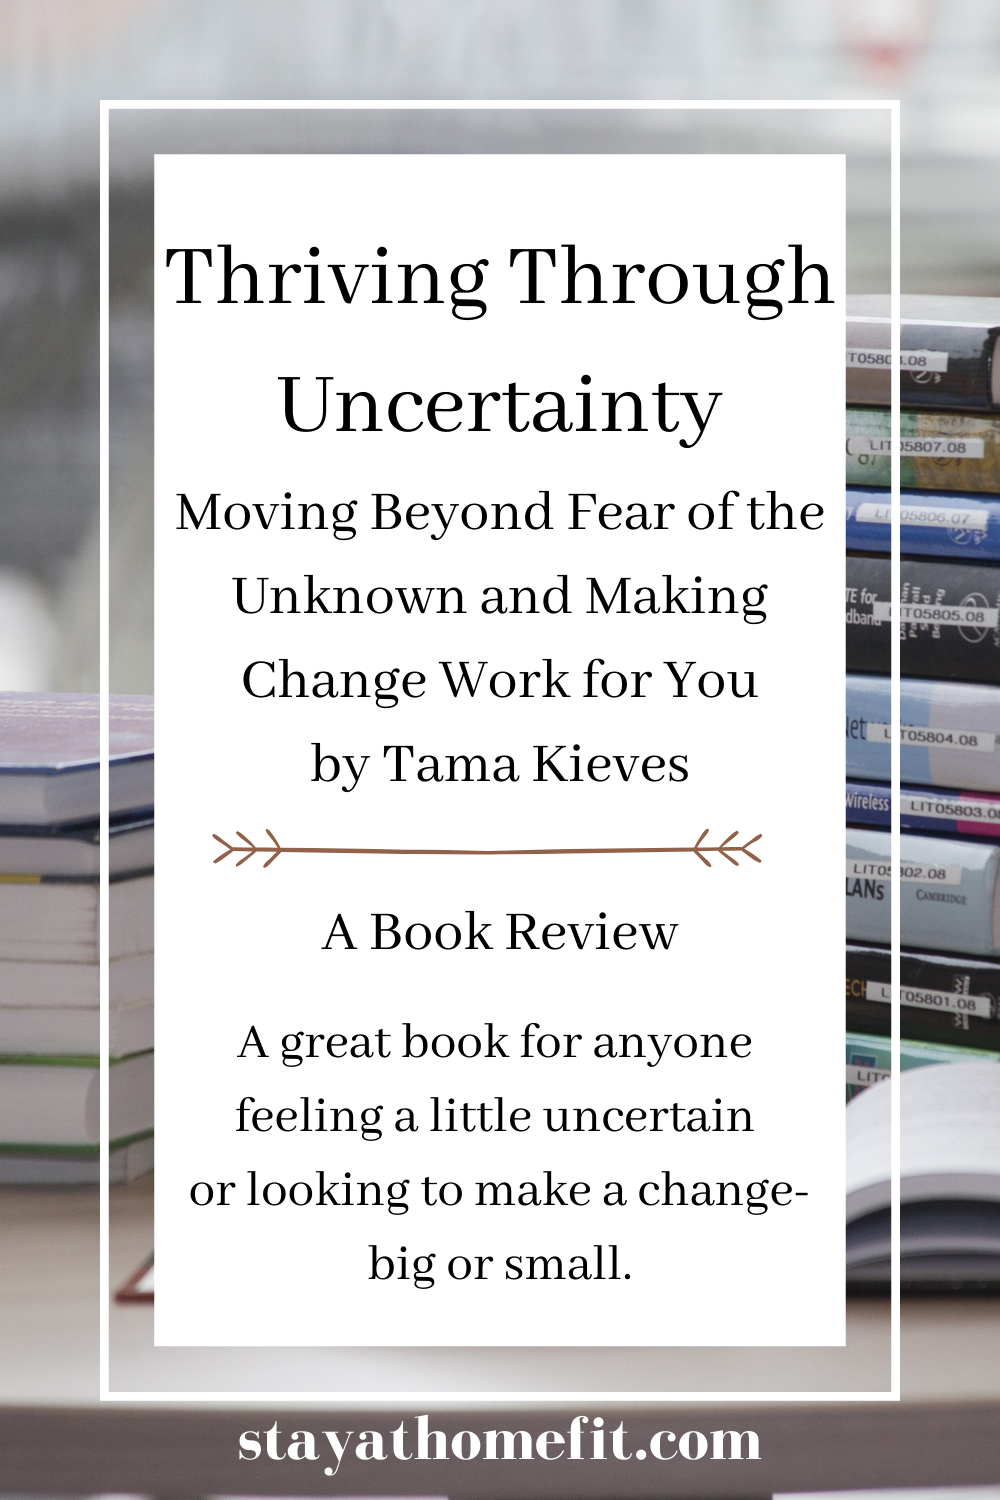 Thriving Through Uncertainty book review